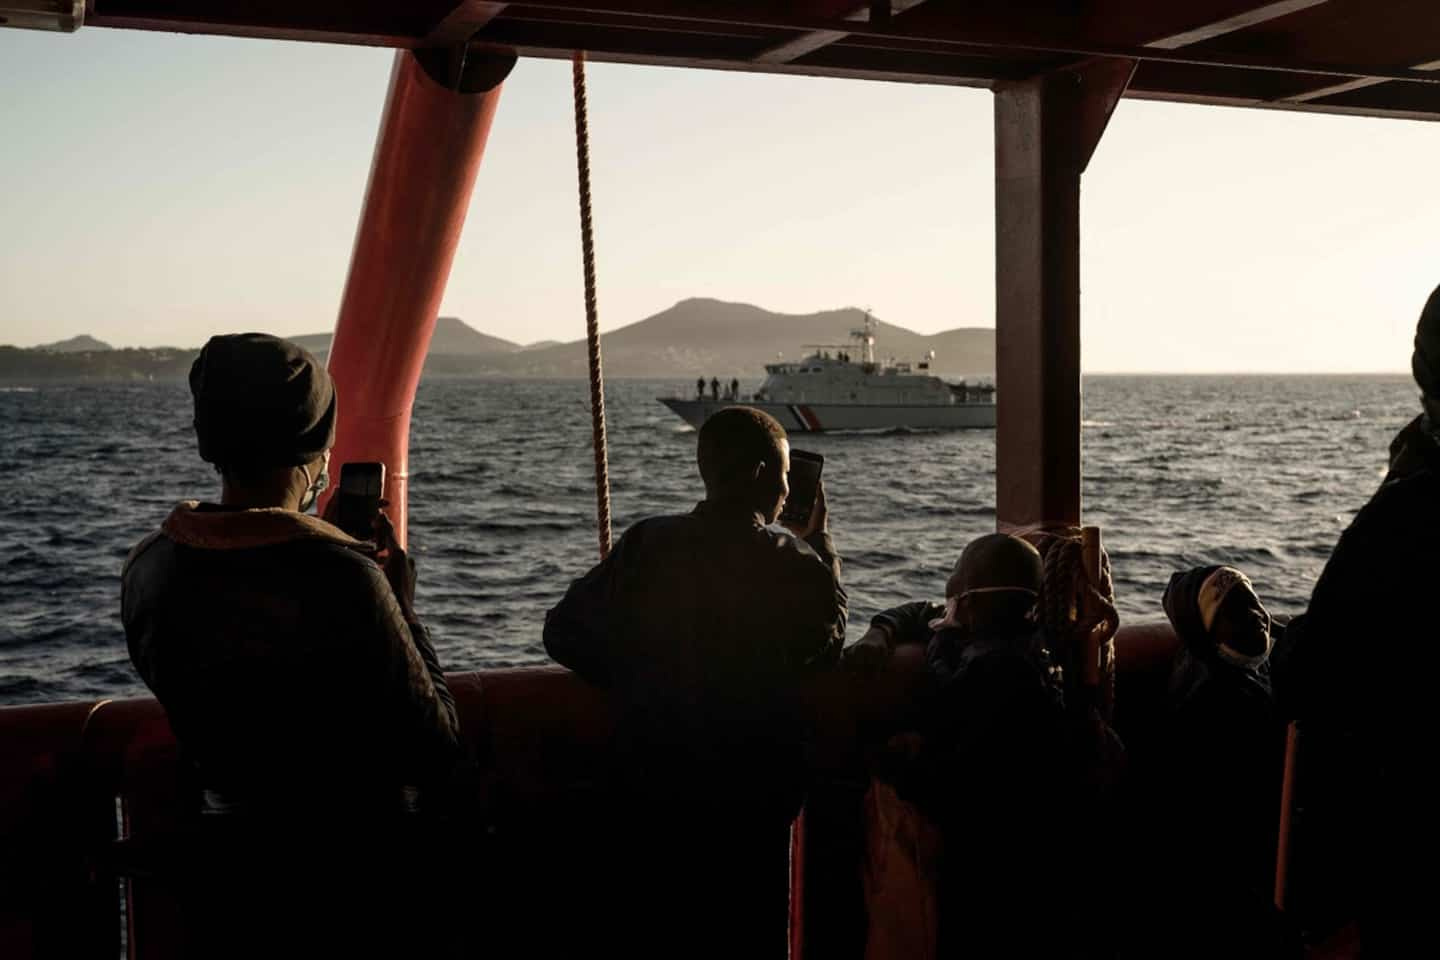 Over a hundred migrants rescued by the Ocean Viking in the Mediterranean